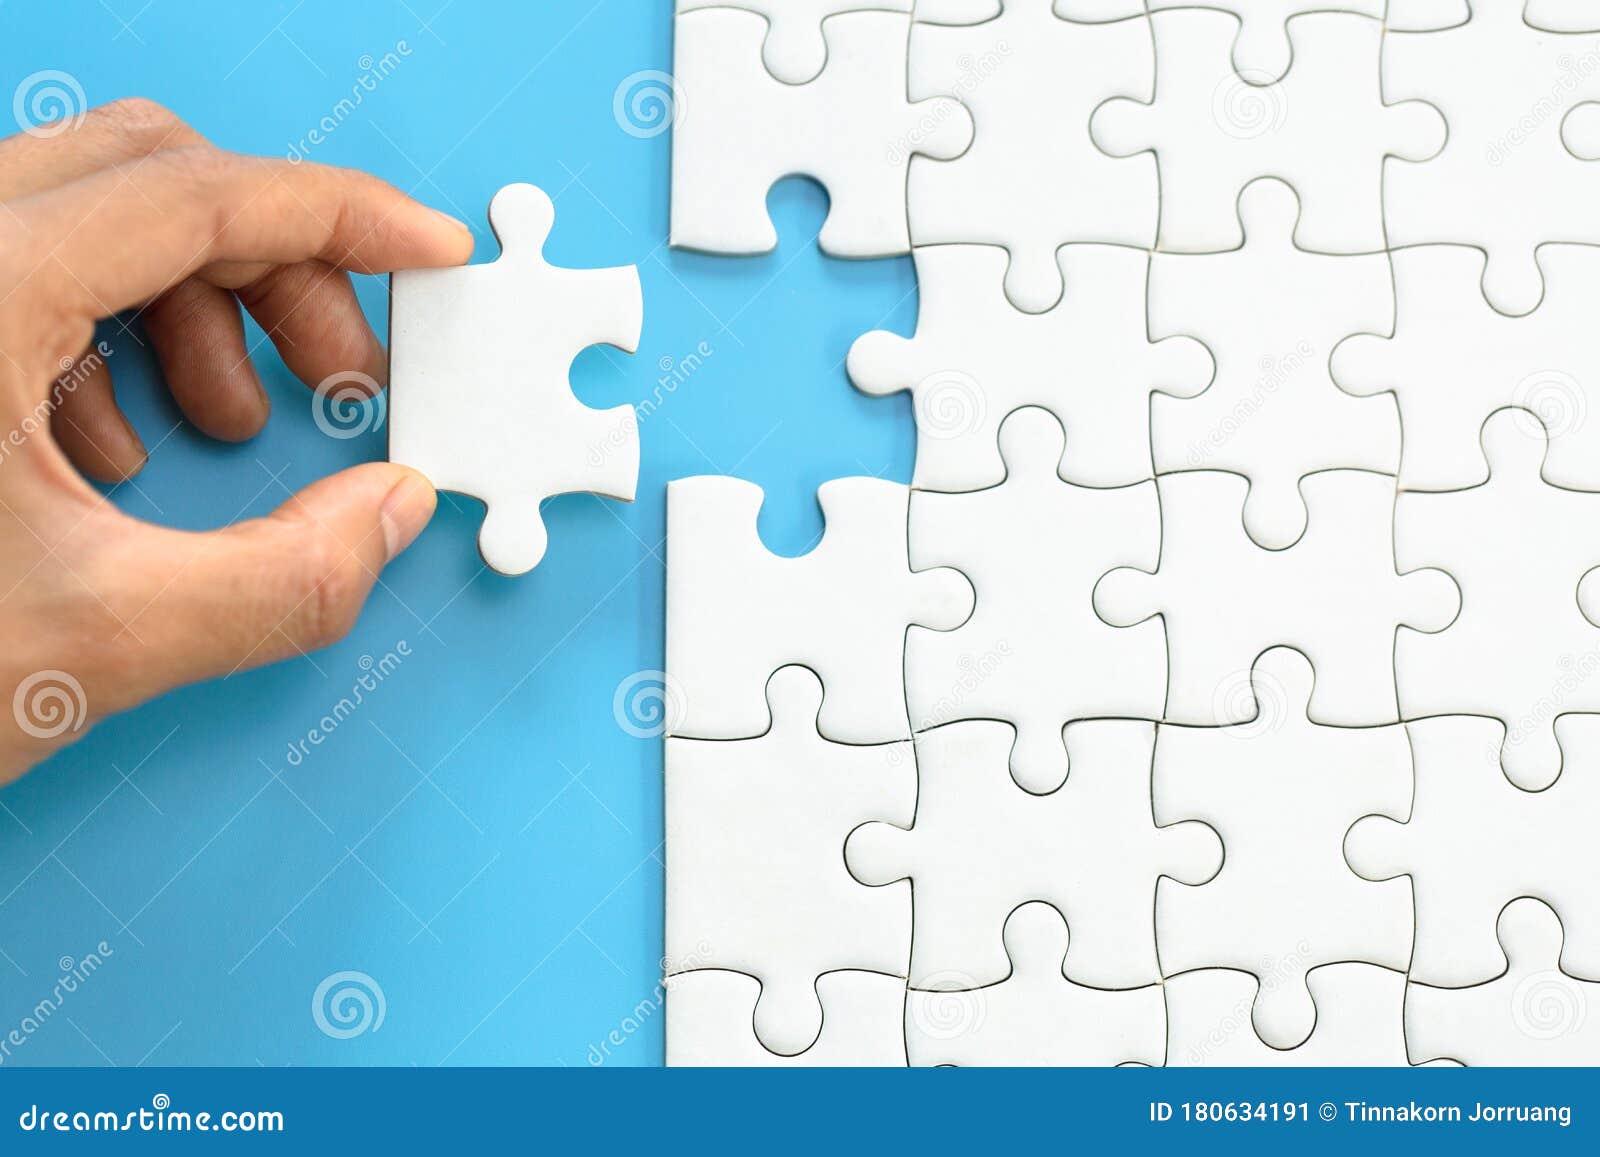 white jigsaw in the hands, the correct solution. teamwork, solving and completing the task. last piece of jigsaw puzzle.